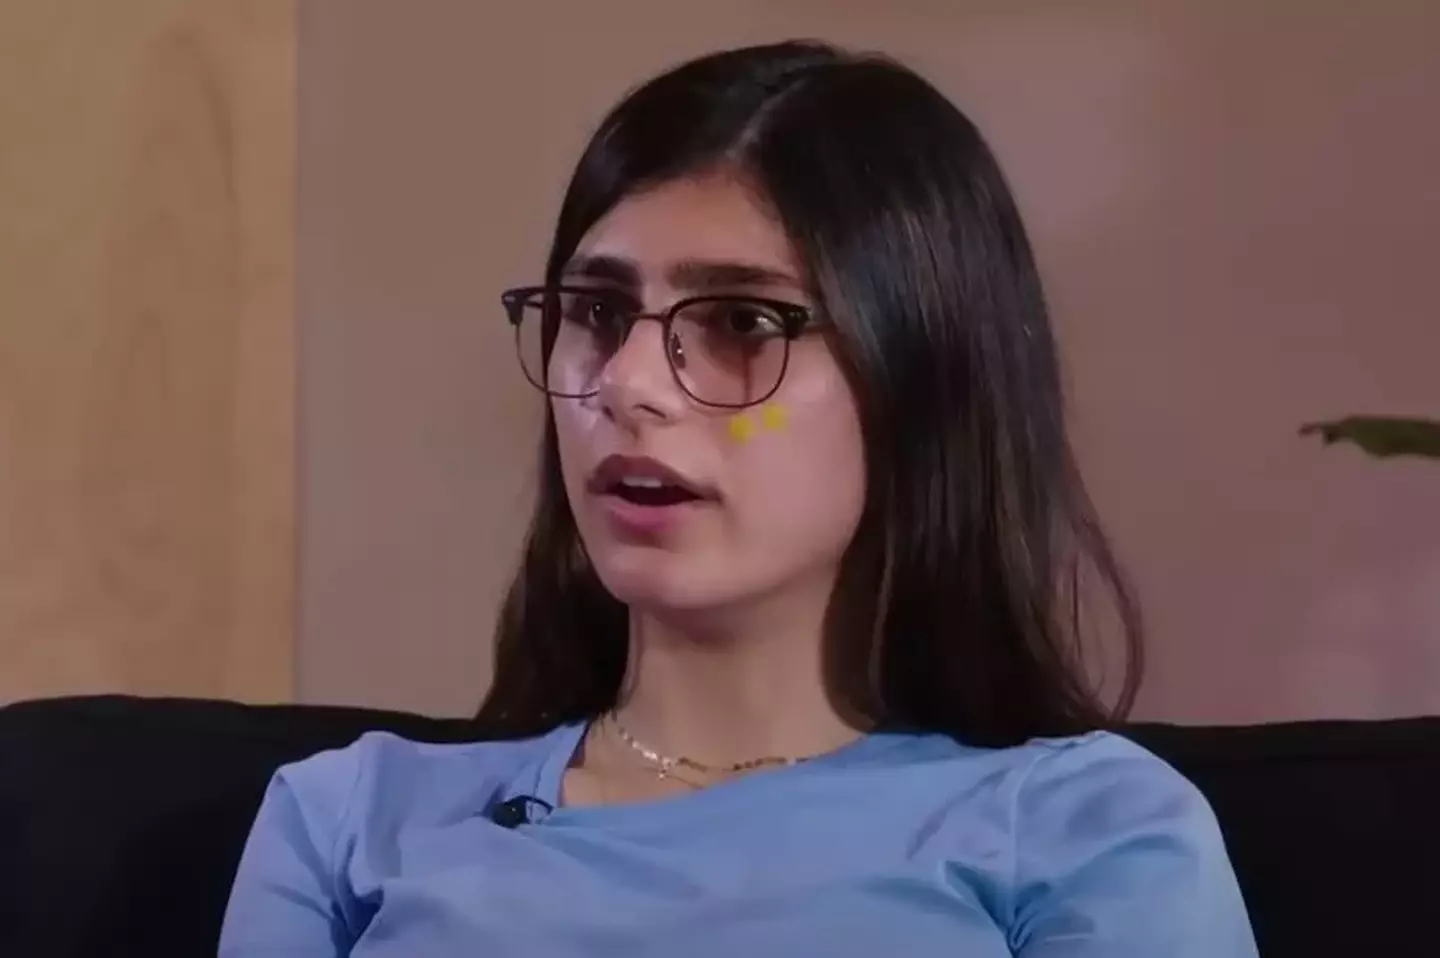 Mia Khalifa told the story in a YouTube video.